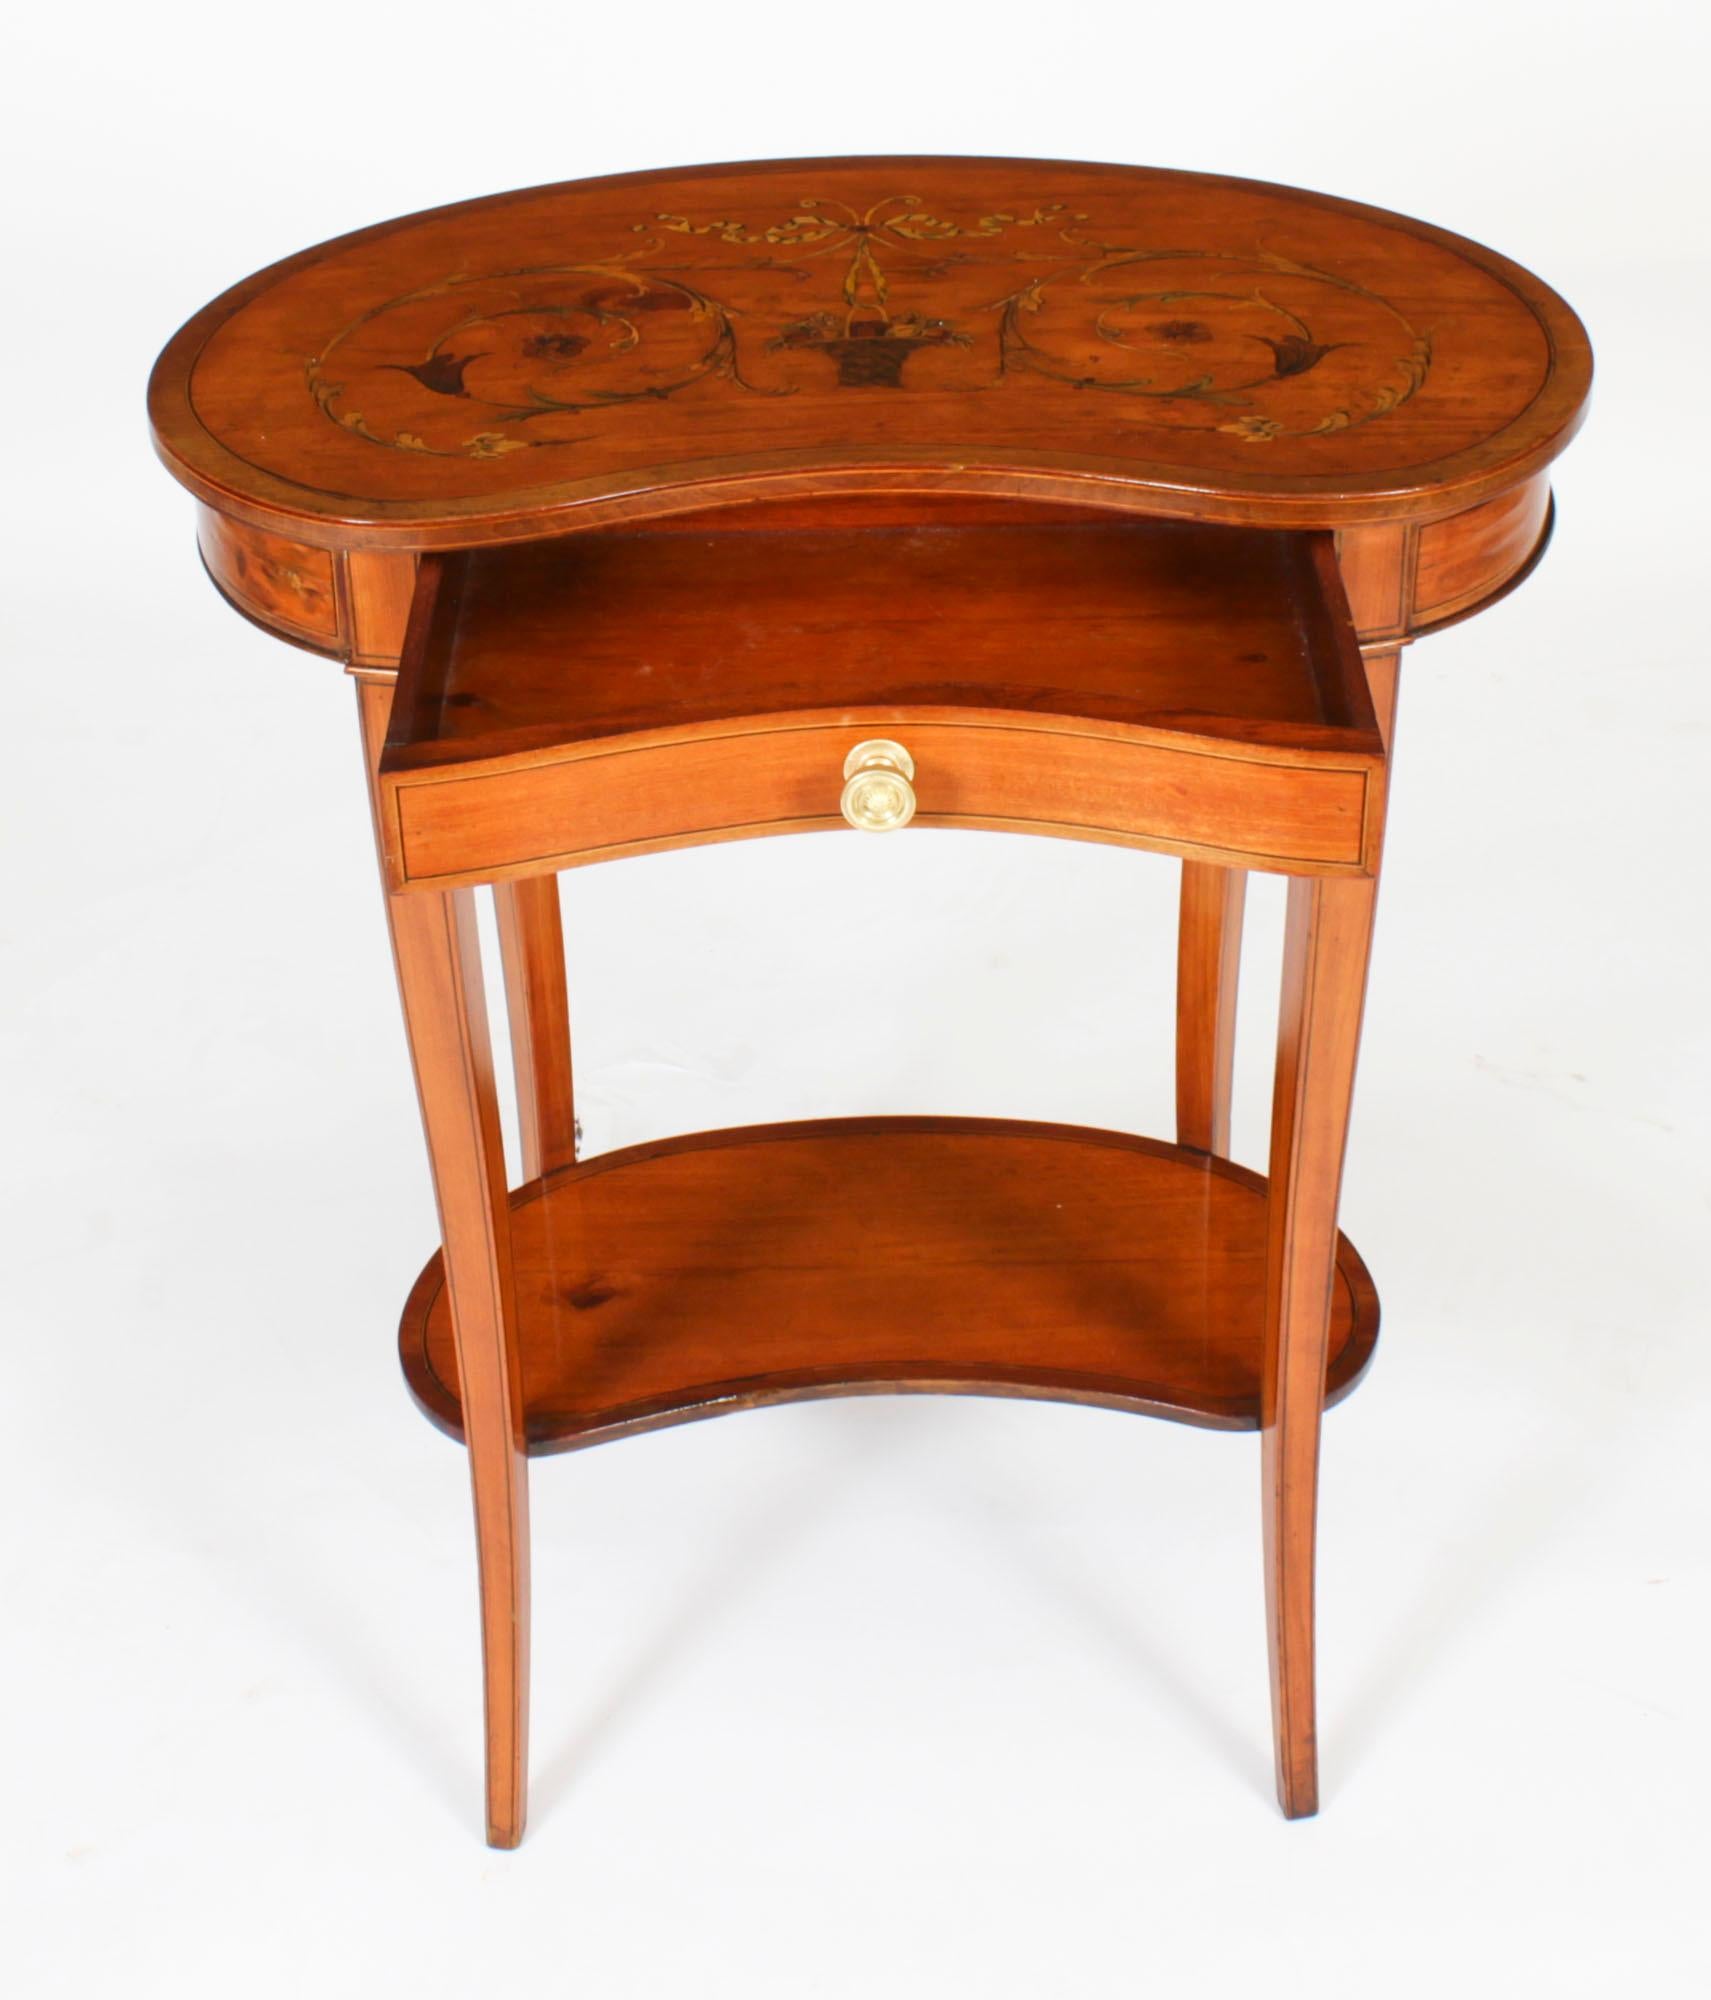 Antique English Marquetry Kidney Shaped Occasionally Tables 19th Century For Sale 4